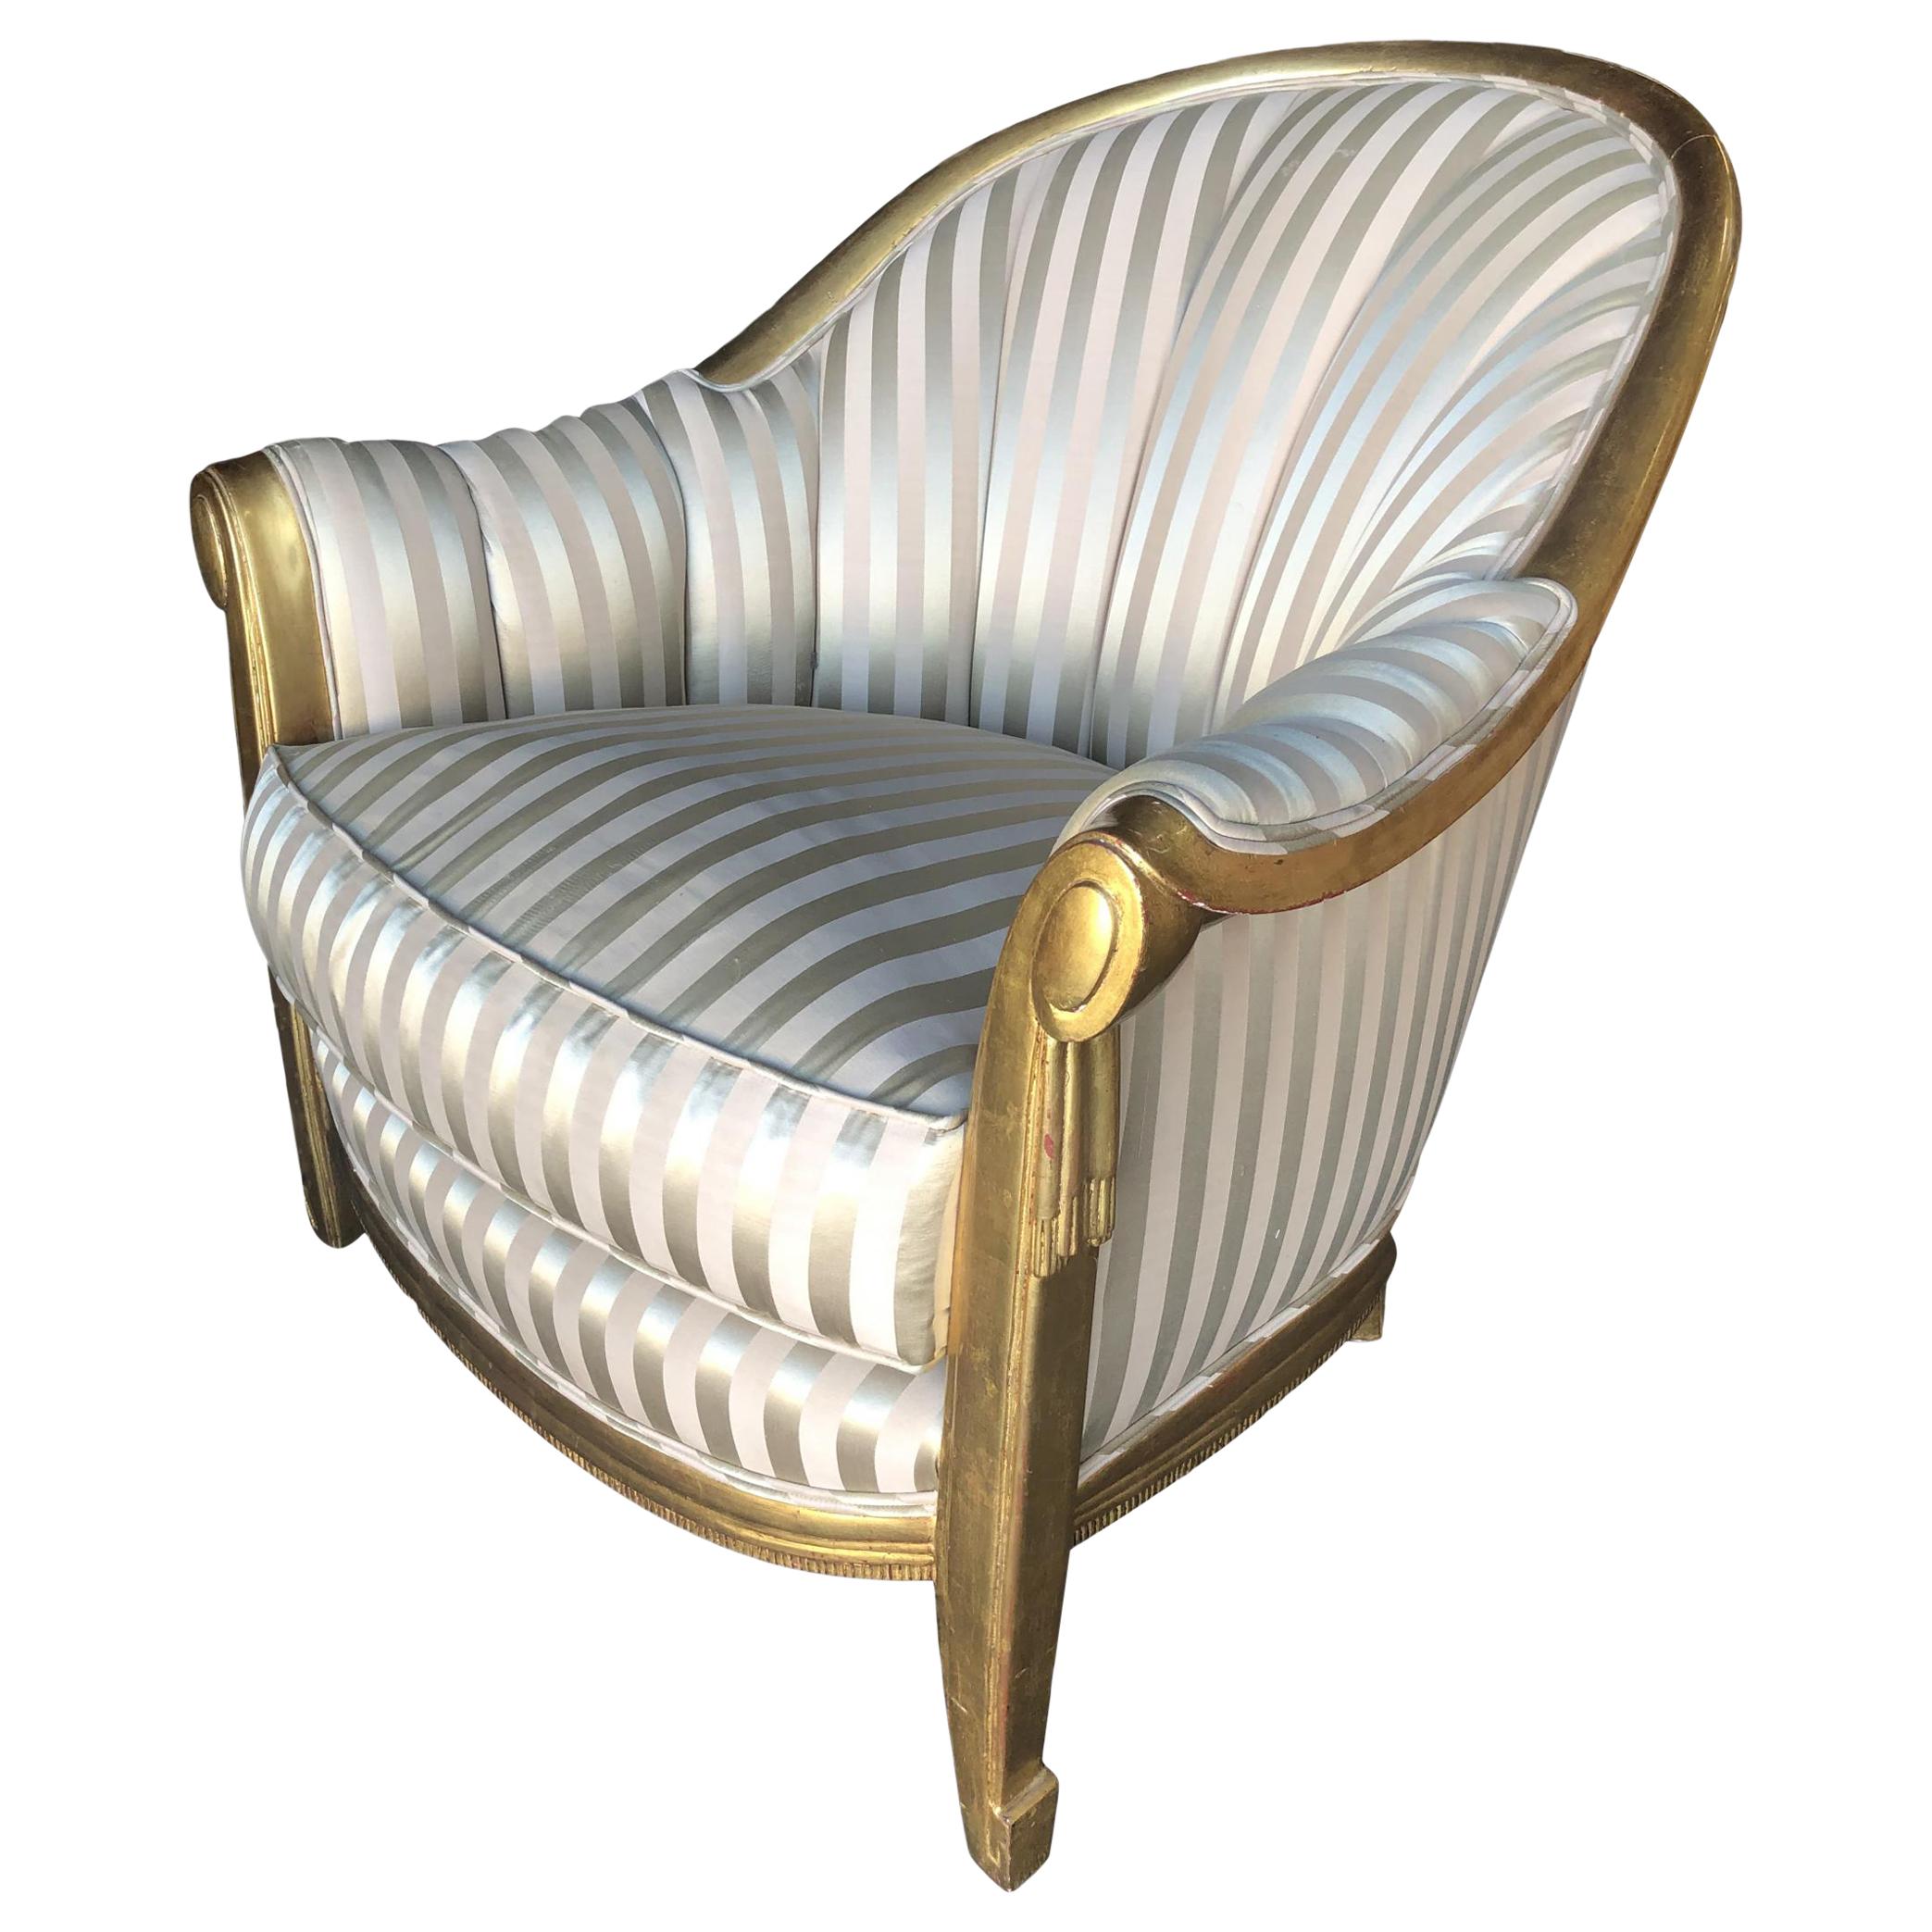 Stripped Gold-Tone Hollywood Regency Shell Back Lounge Armchair